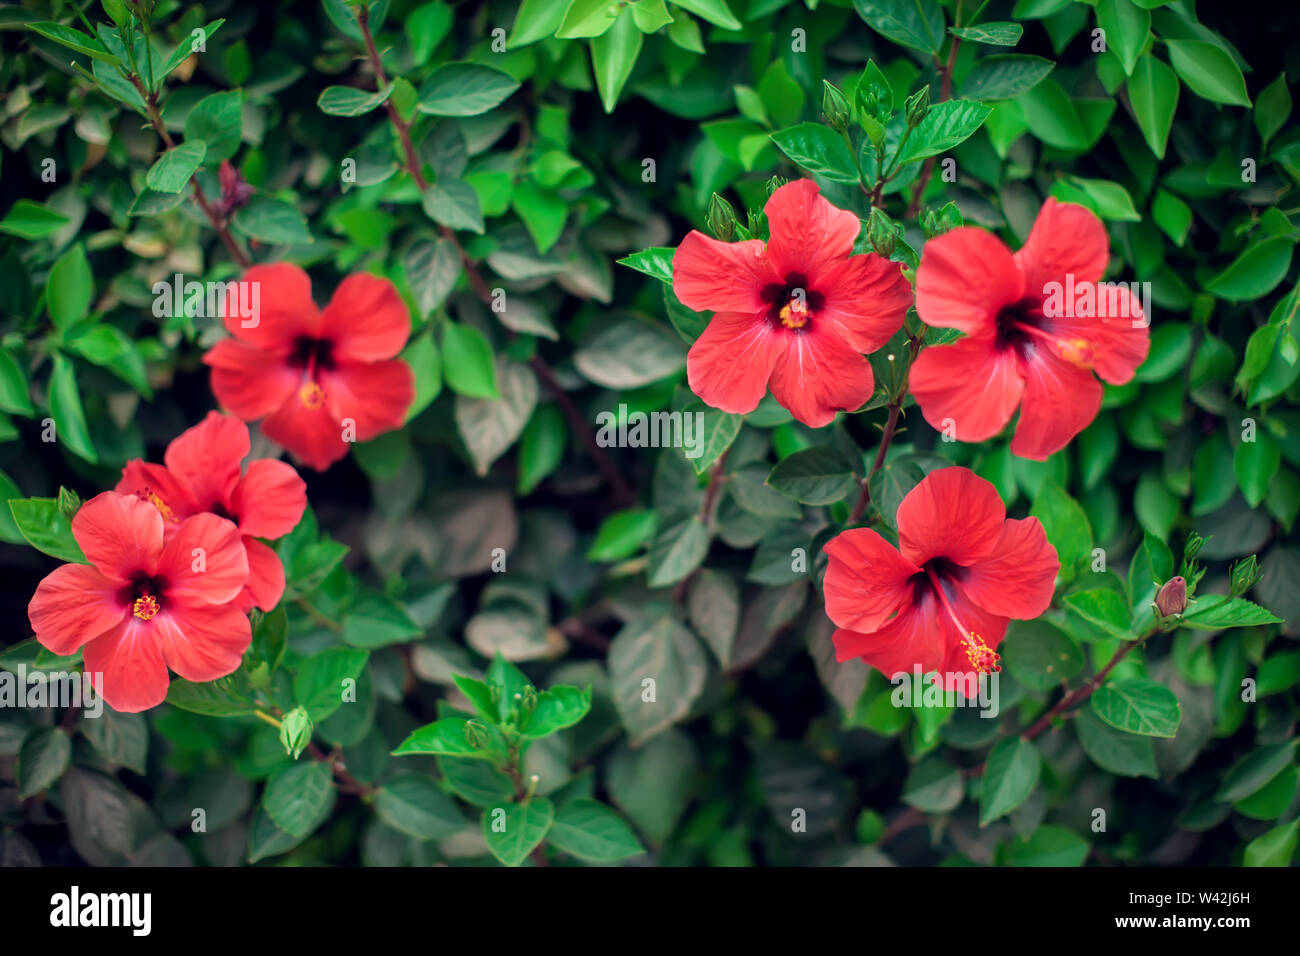 Red hibiscus(karkade) plant in the garden Stock Photo - Alamy